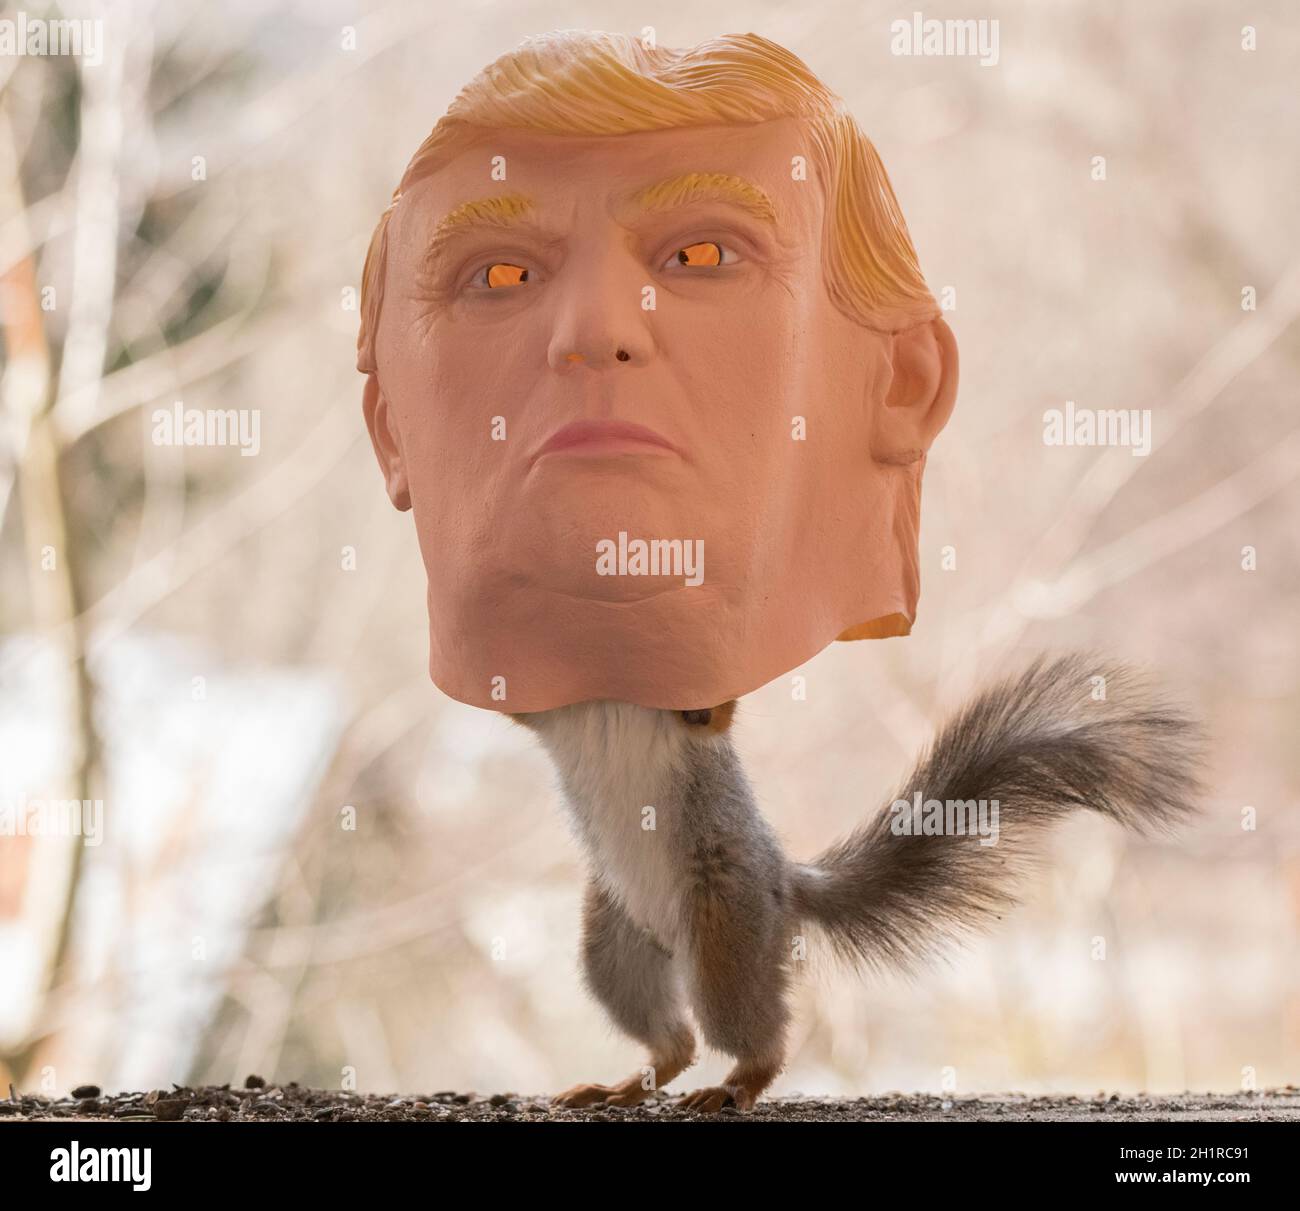 Red Squirrel stand inside a trump mask Stock Photo